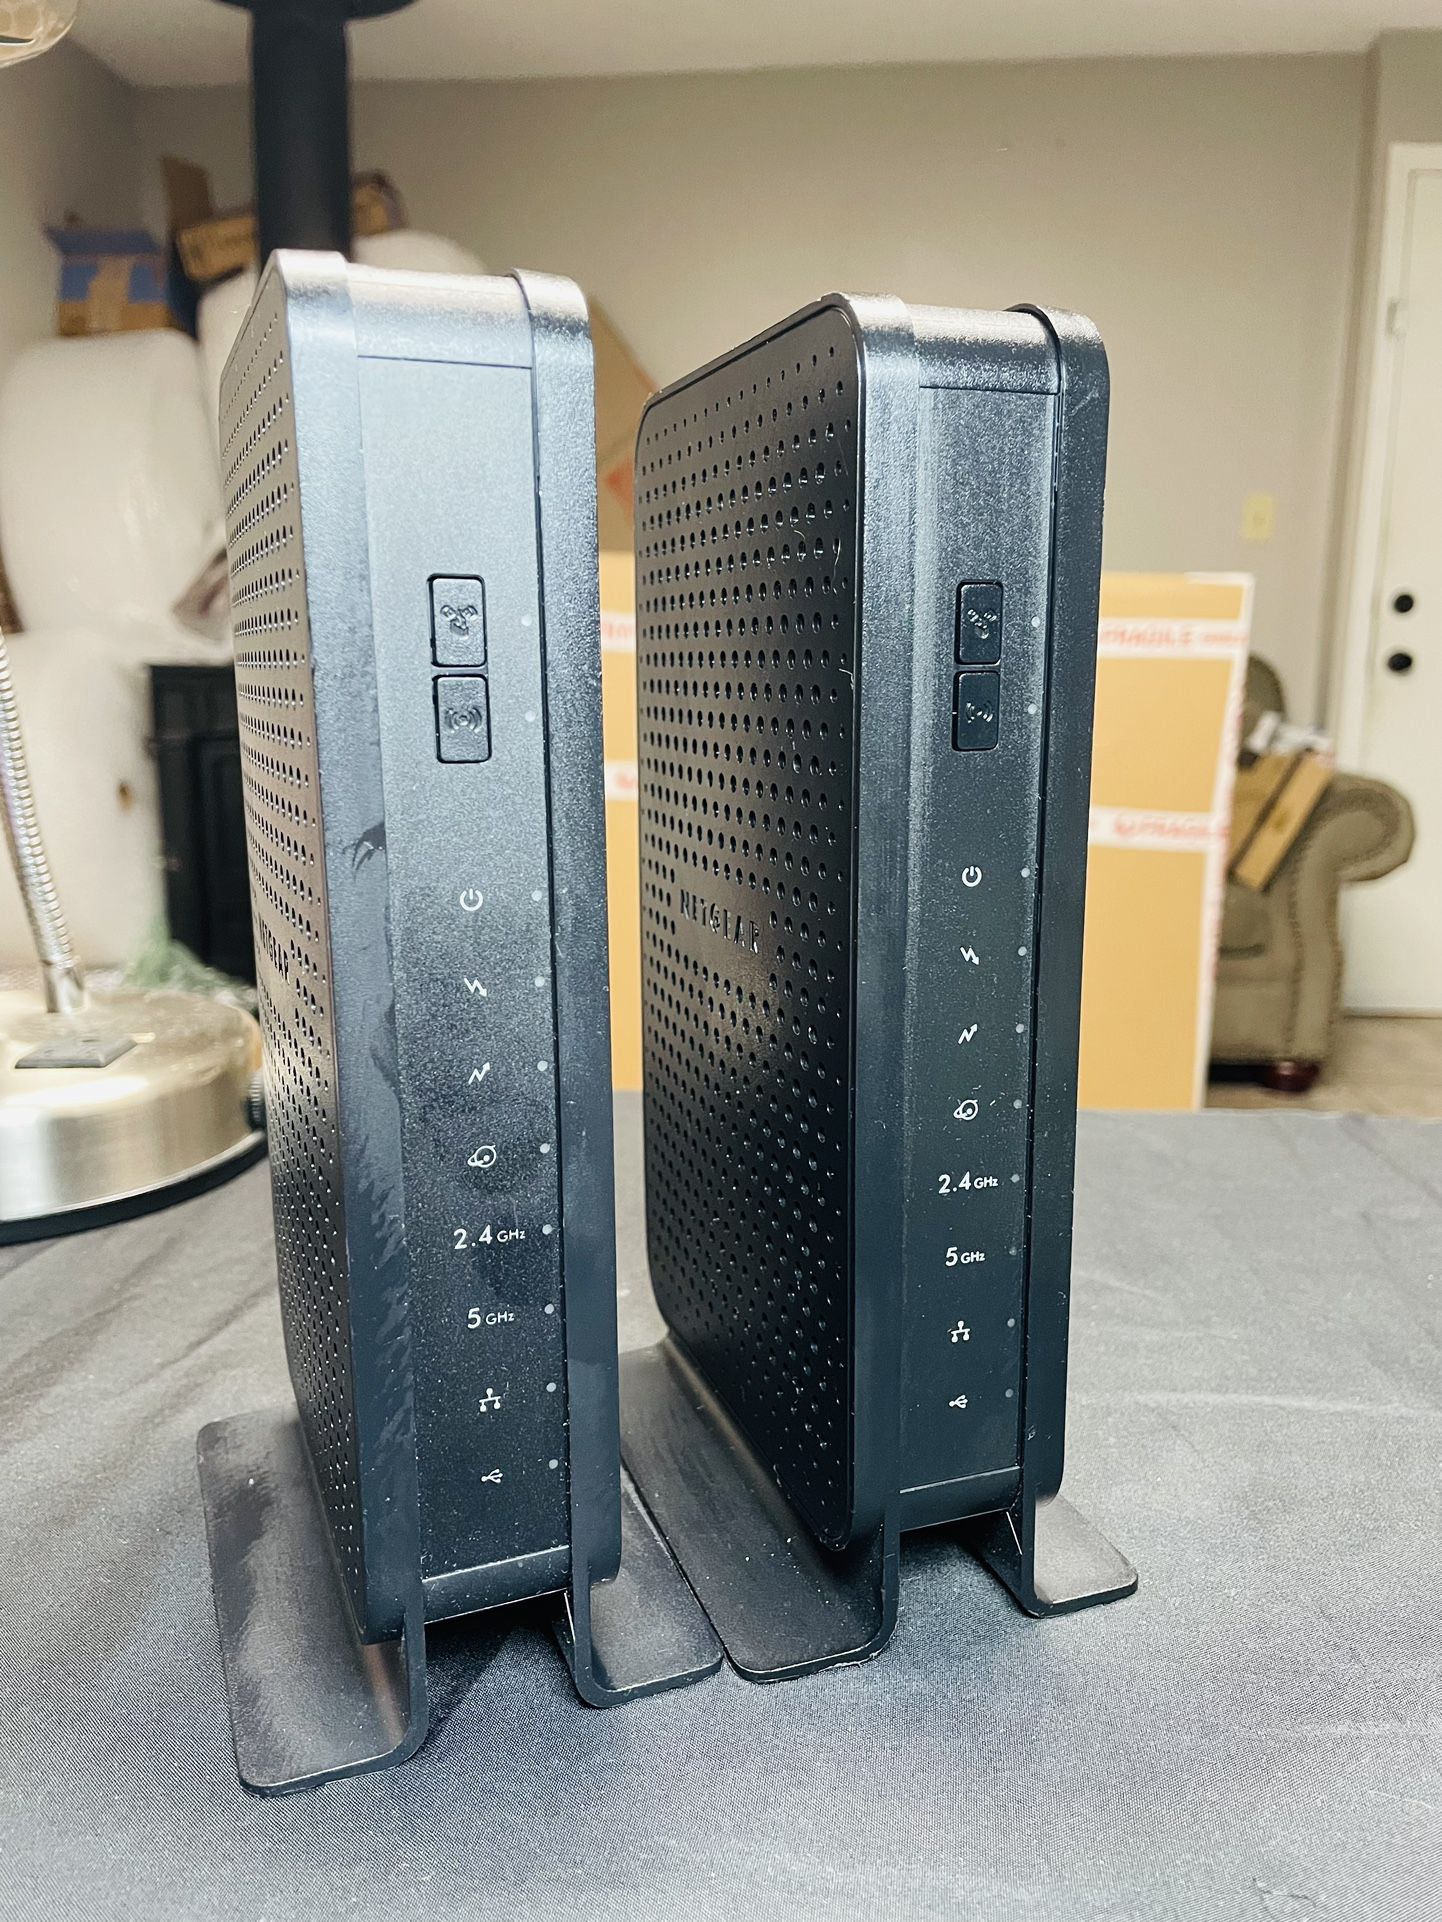 Lot of 2 routers netgear c3700 WiFi n600 cable modem router